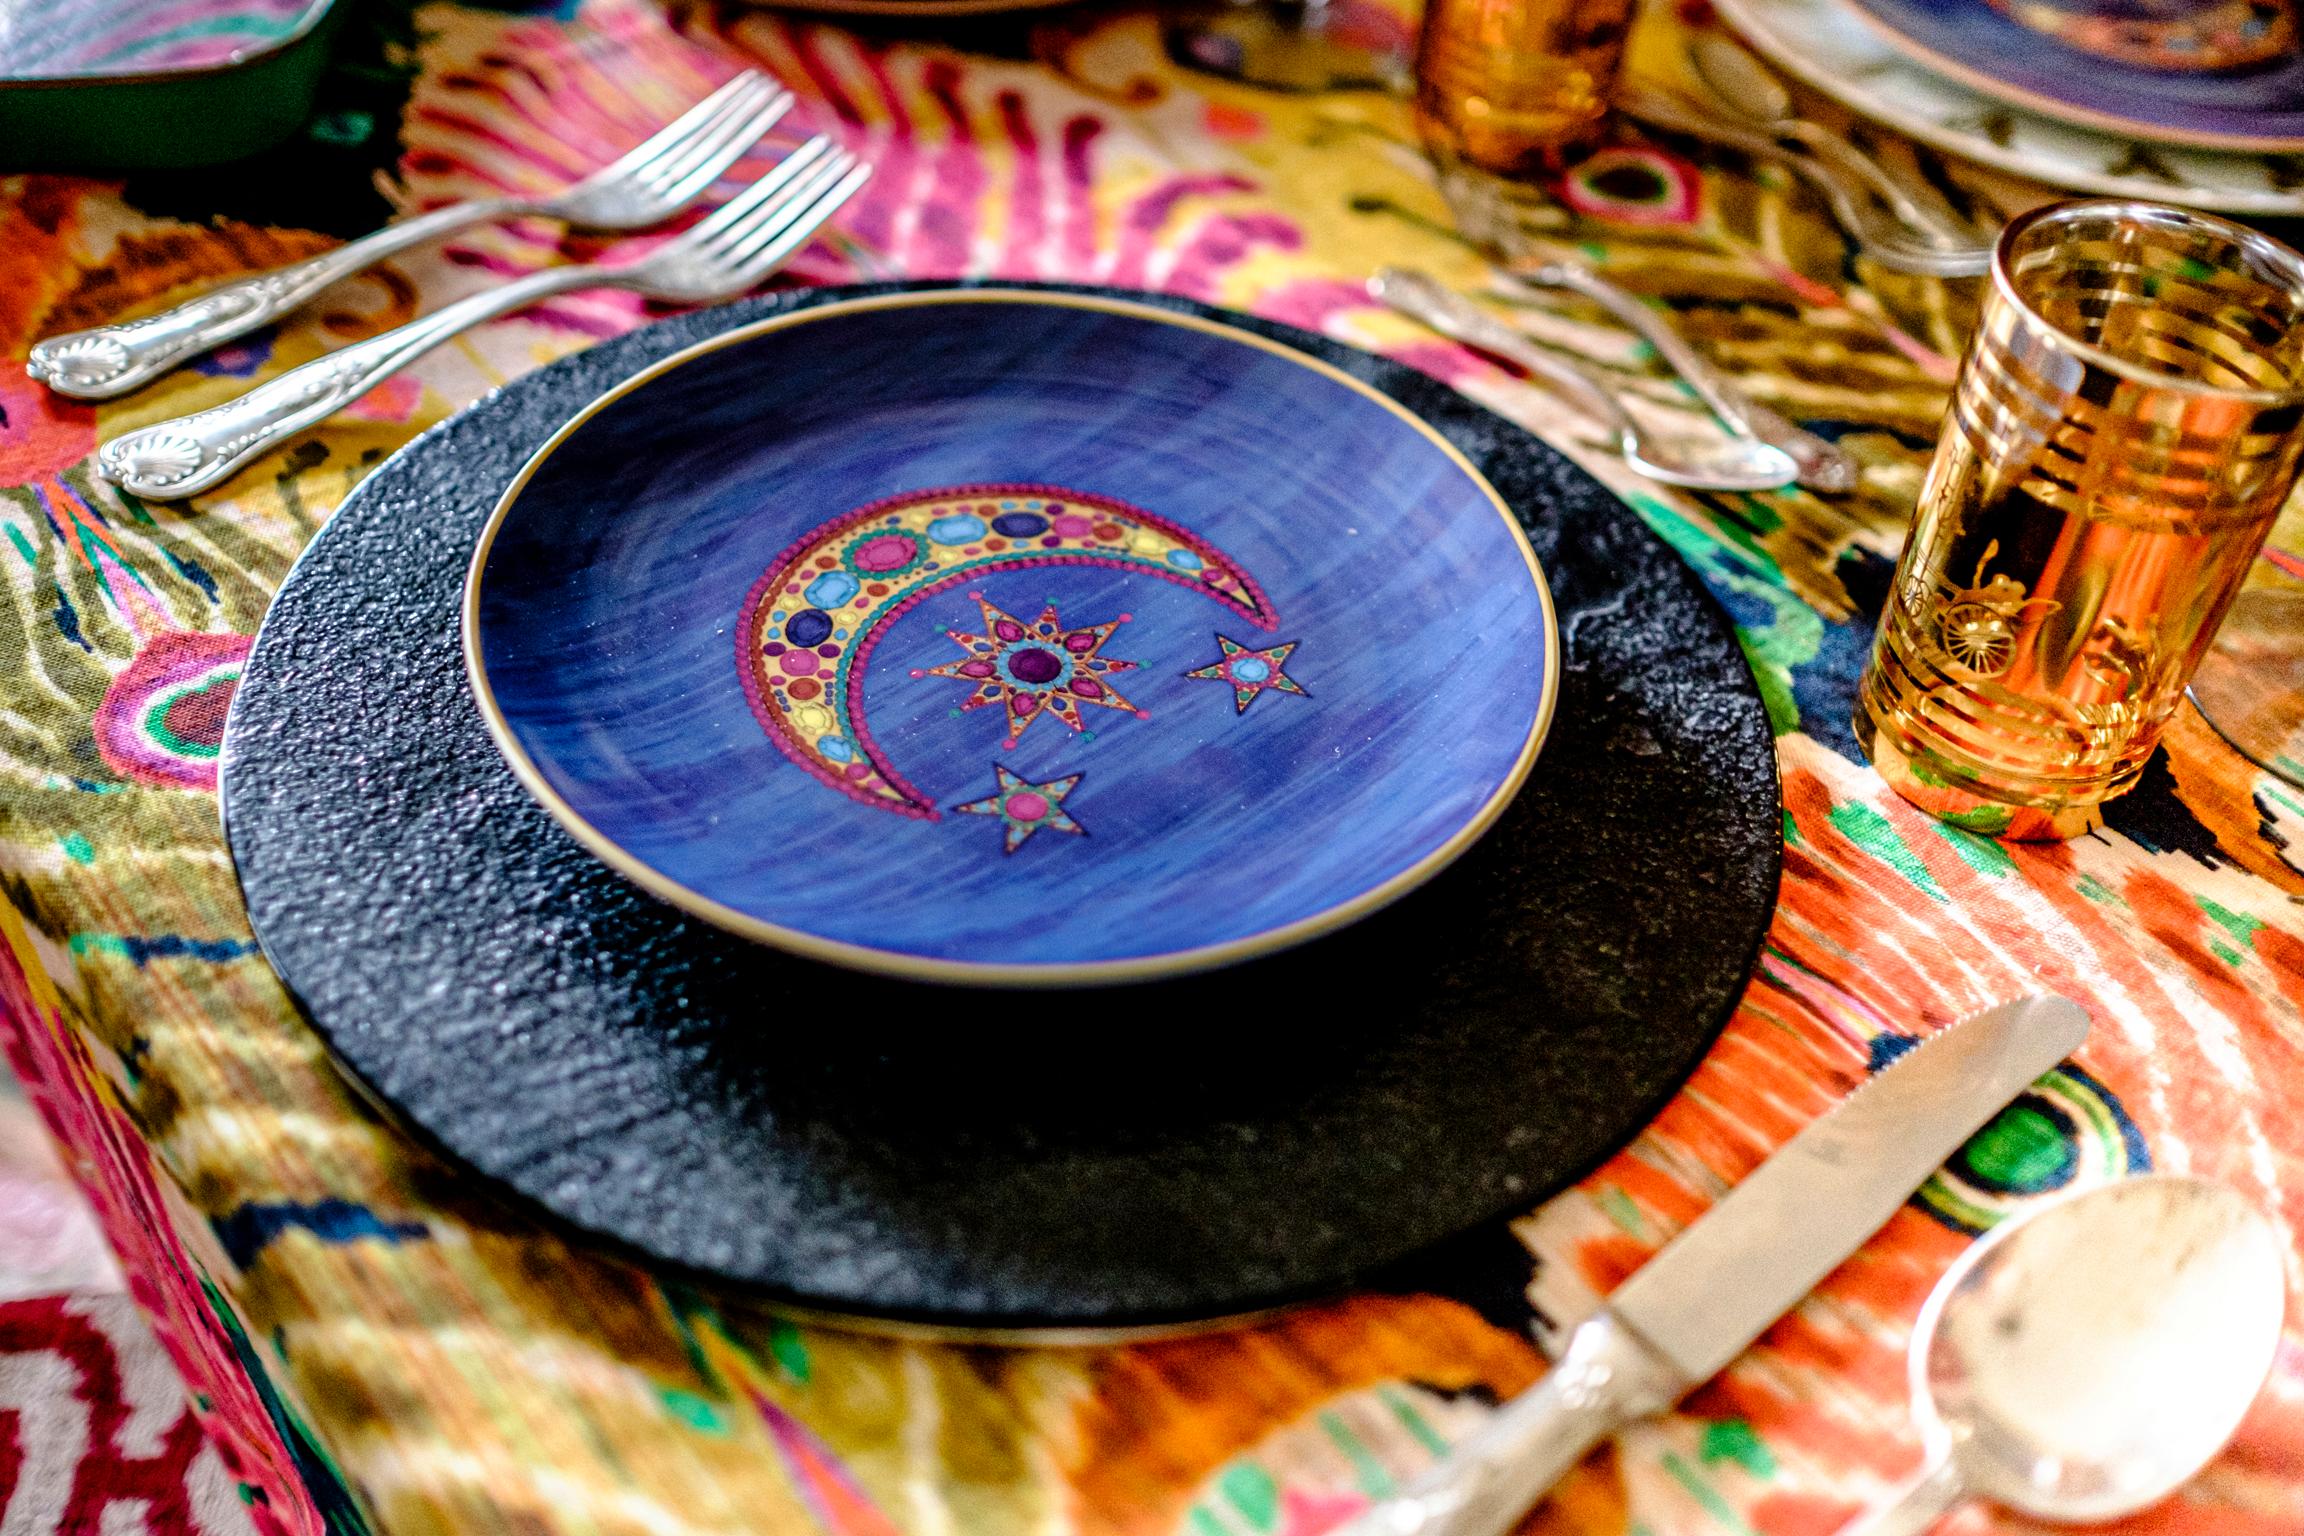 Matthew Williamson one of the most well known fashion designer has created a tabletop and textile collection for Les-Ottomans. Colors is a must in all Williamsons’ designs as well as the peacock’s references that are here revealed in several new and